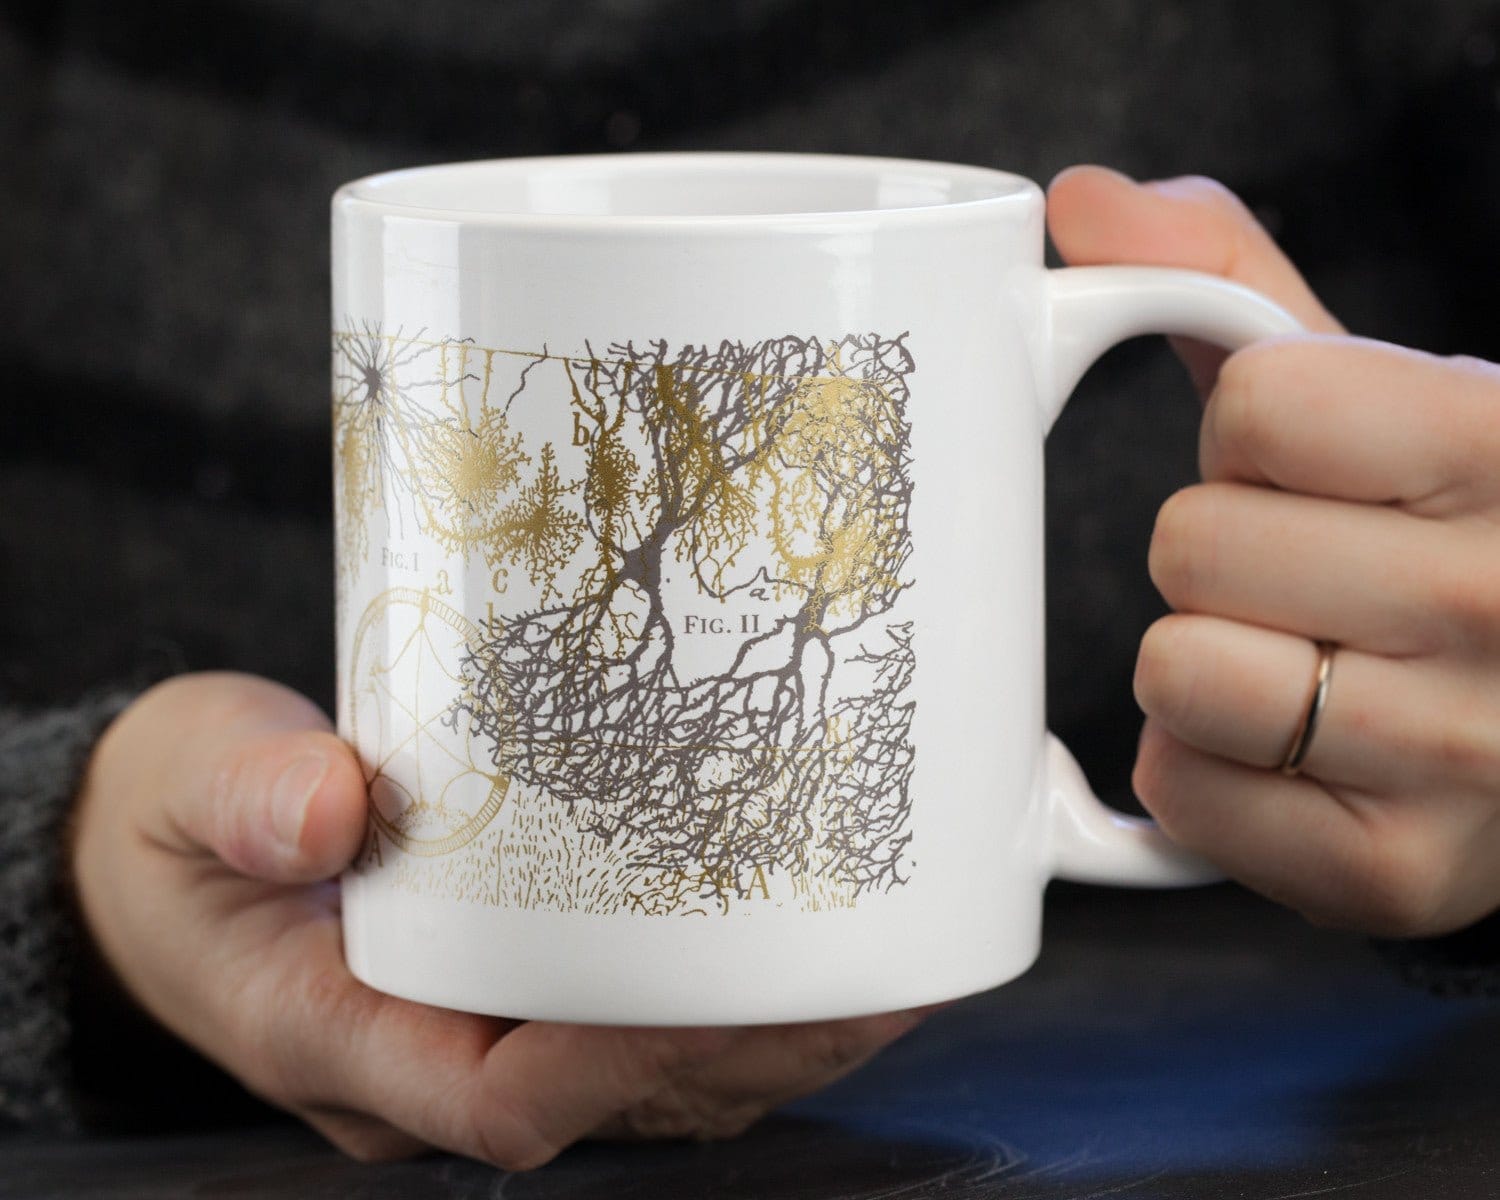 BODIES Exhibition Brain Spinner Coffee Mug It’s What’s Inside That Counts